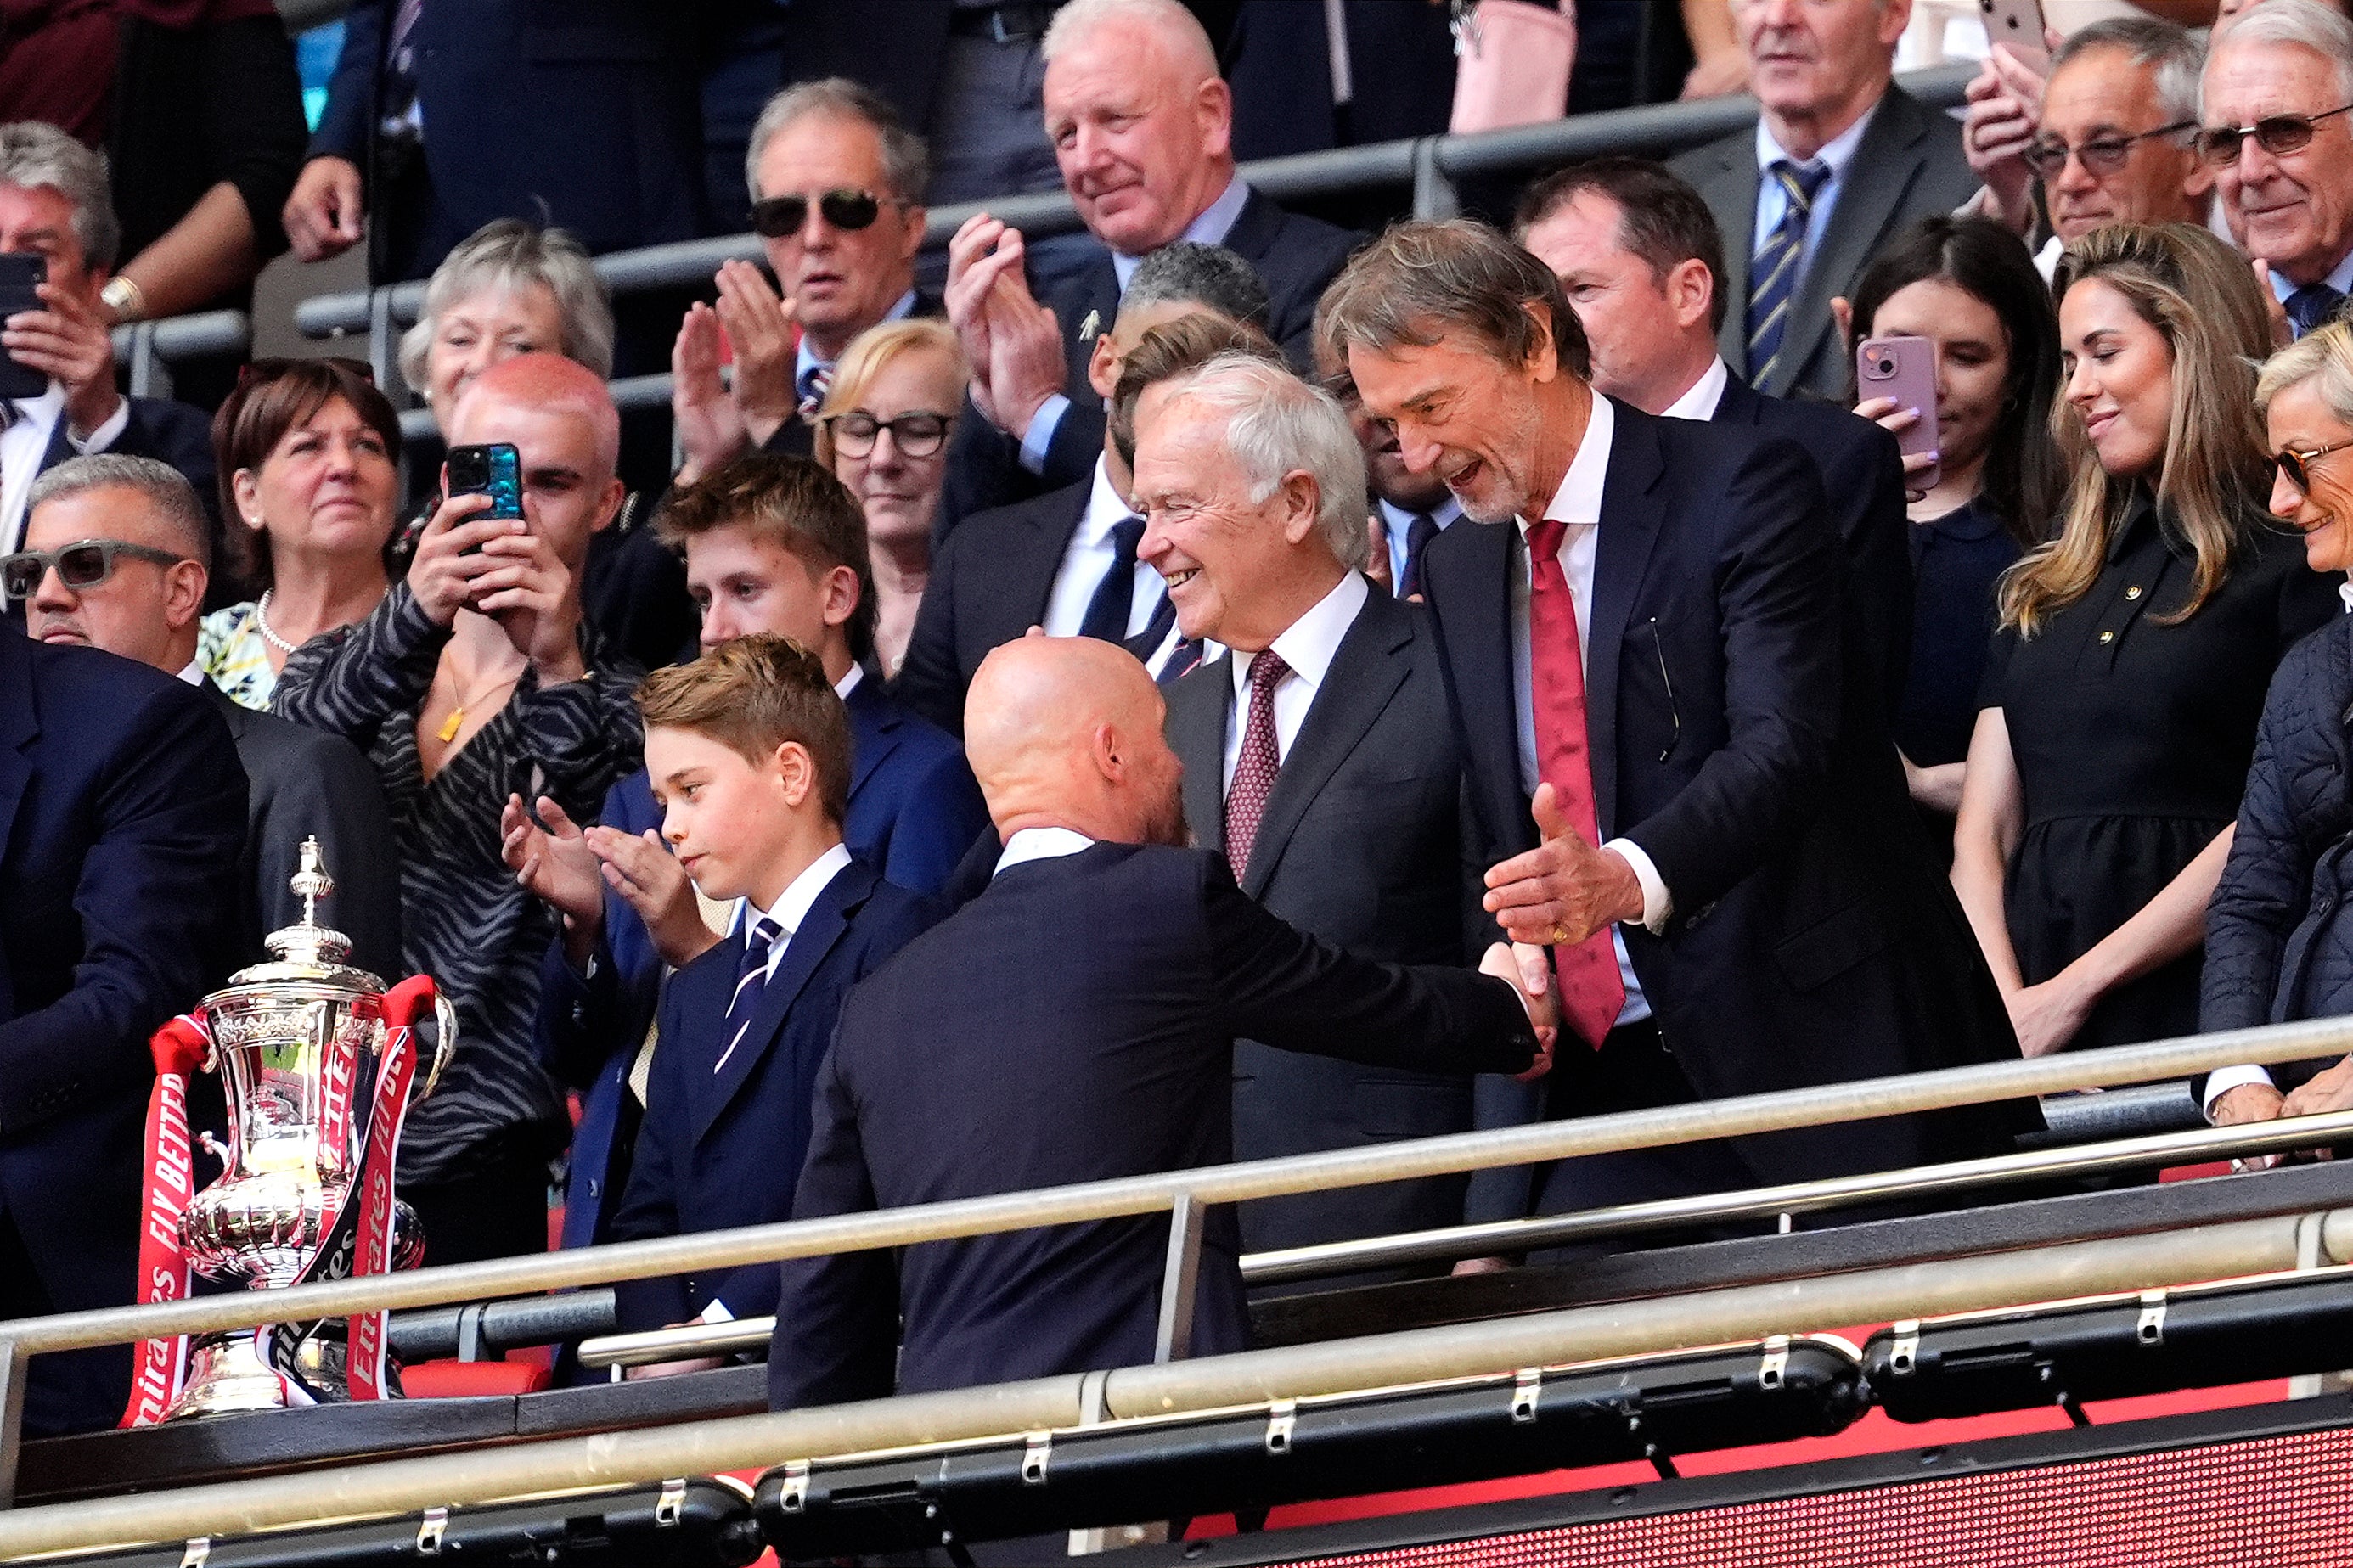 Sir Jim Ratcliffe and Erik ten Hag were civil but not exactly warm after Manchester United’s FA Cup win